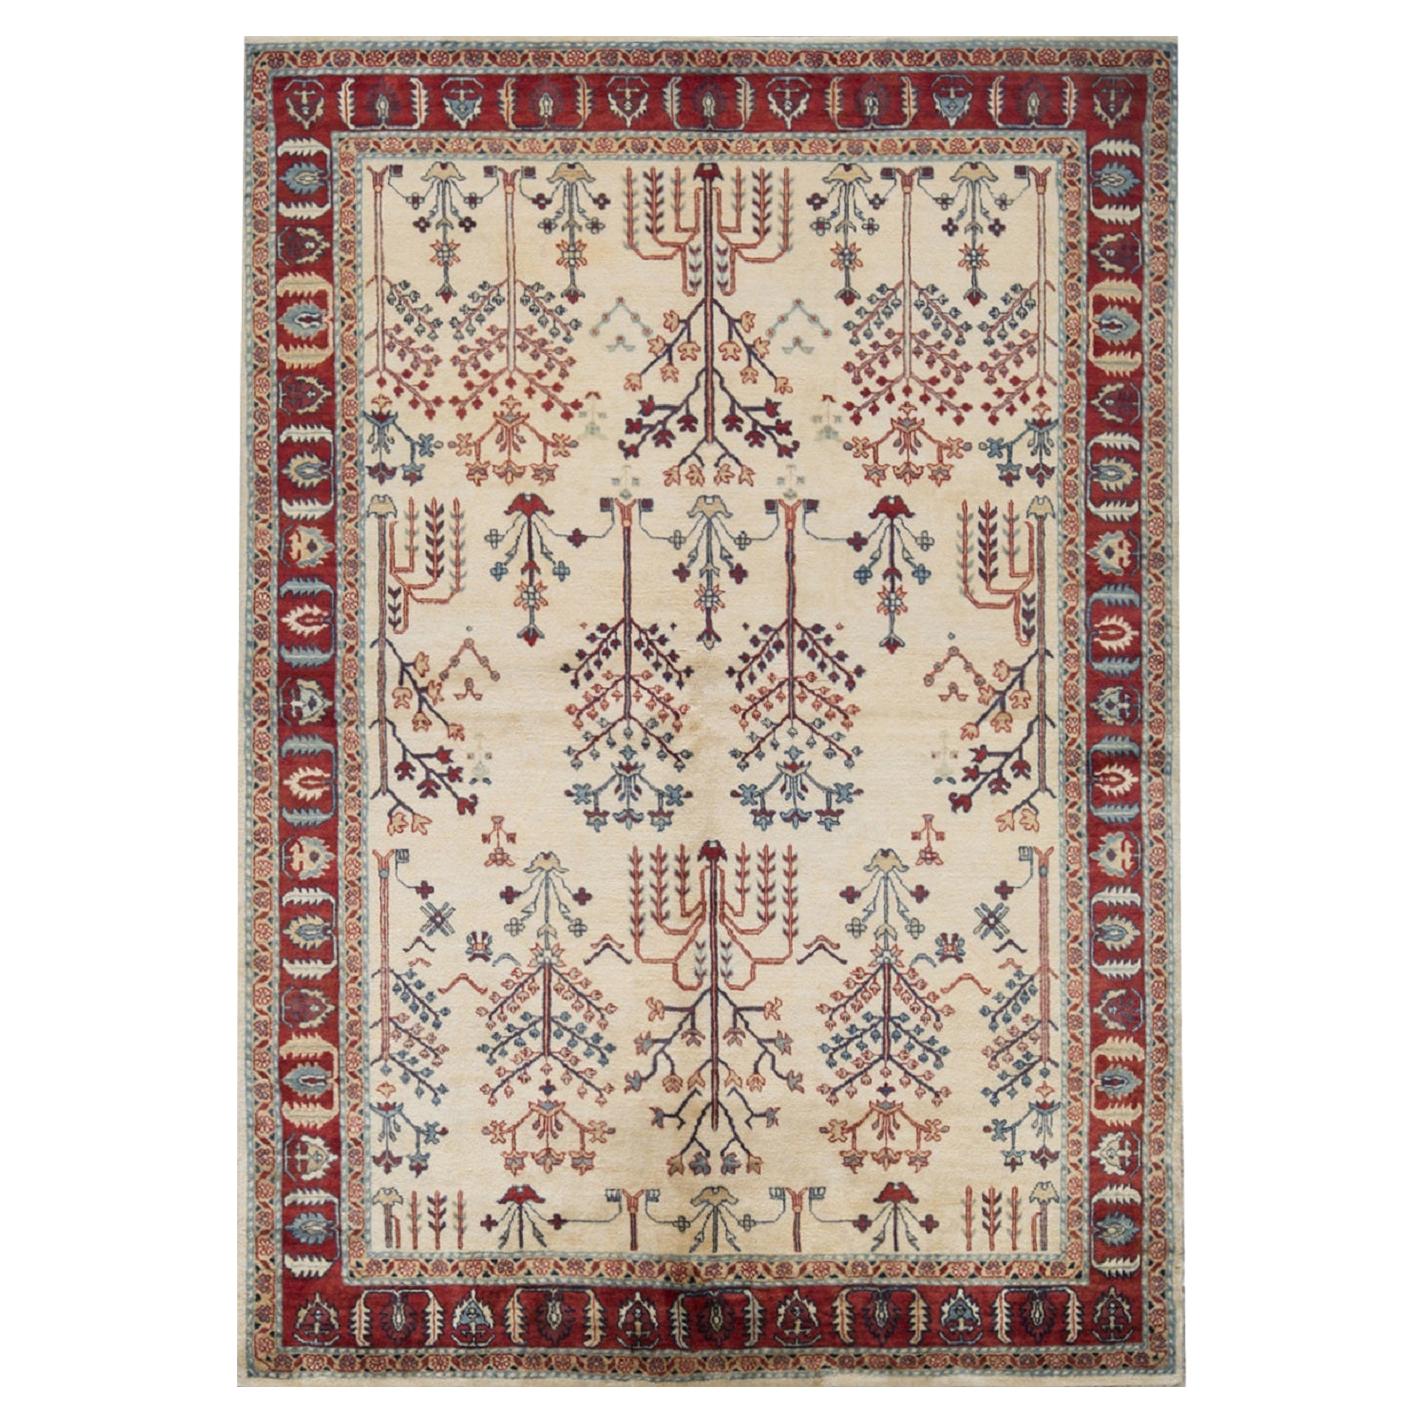 One of a Kind Contemporary Handwoven Wool Area Rug 5'7 x 7'10 For Sale